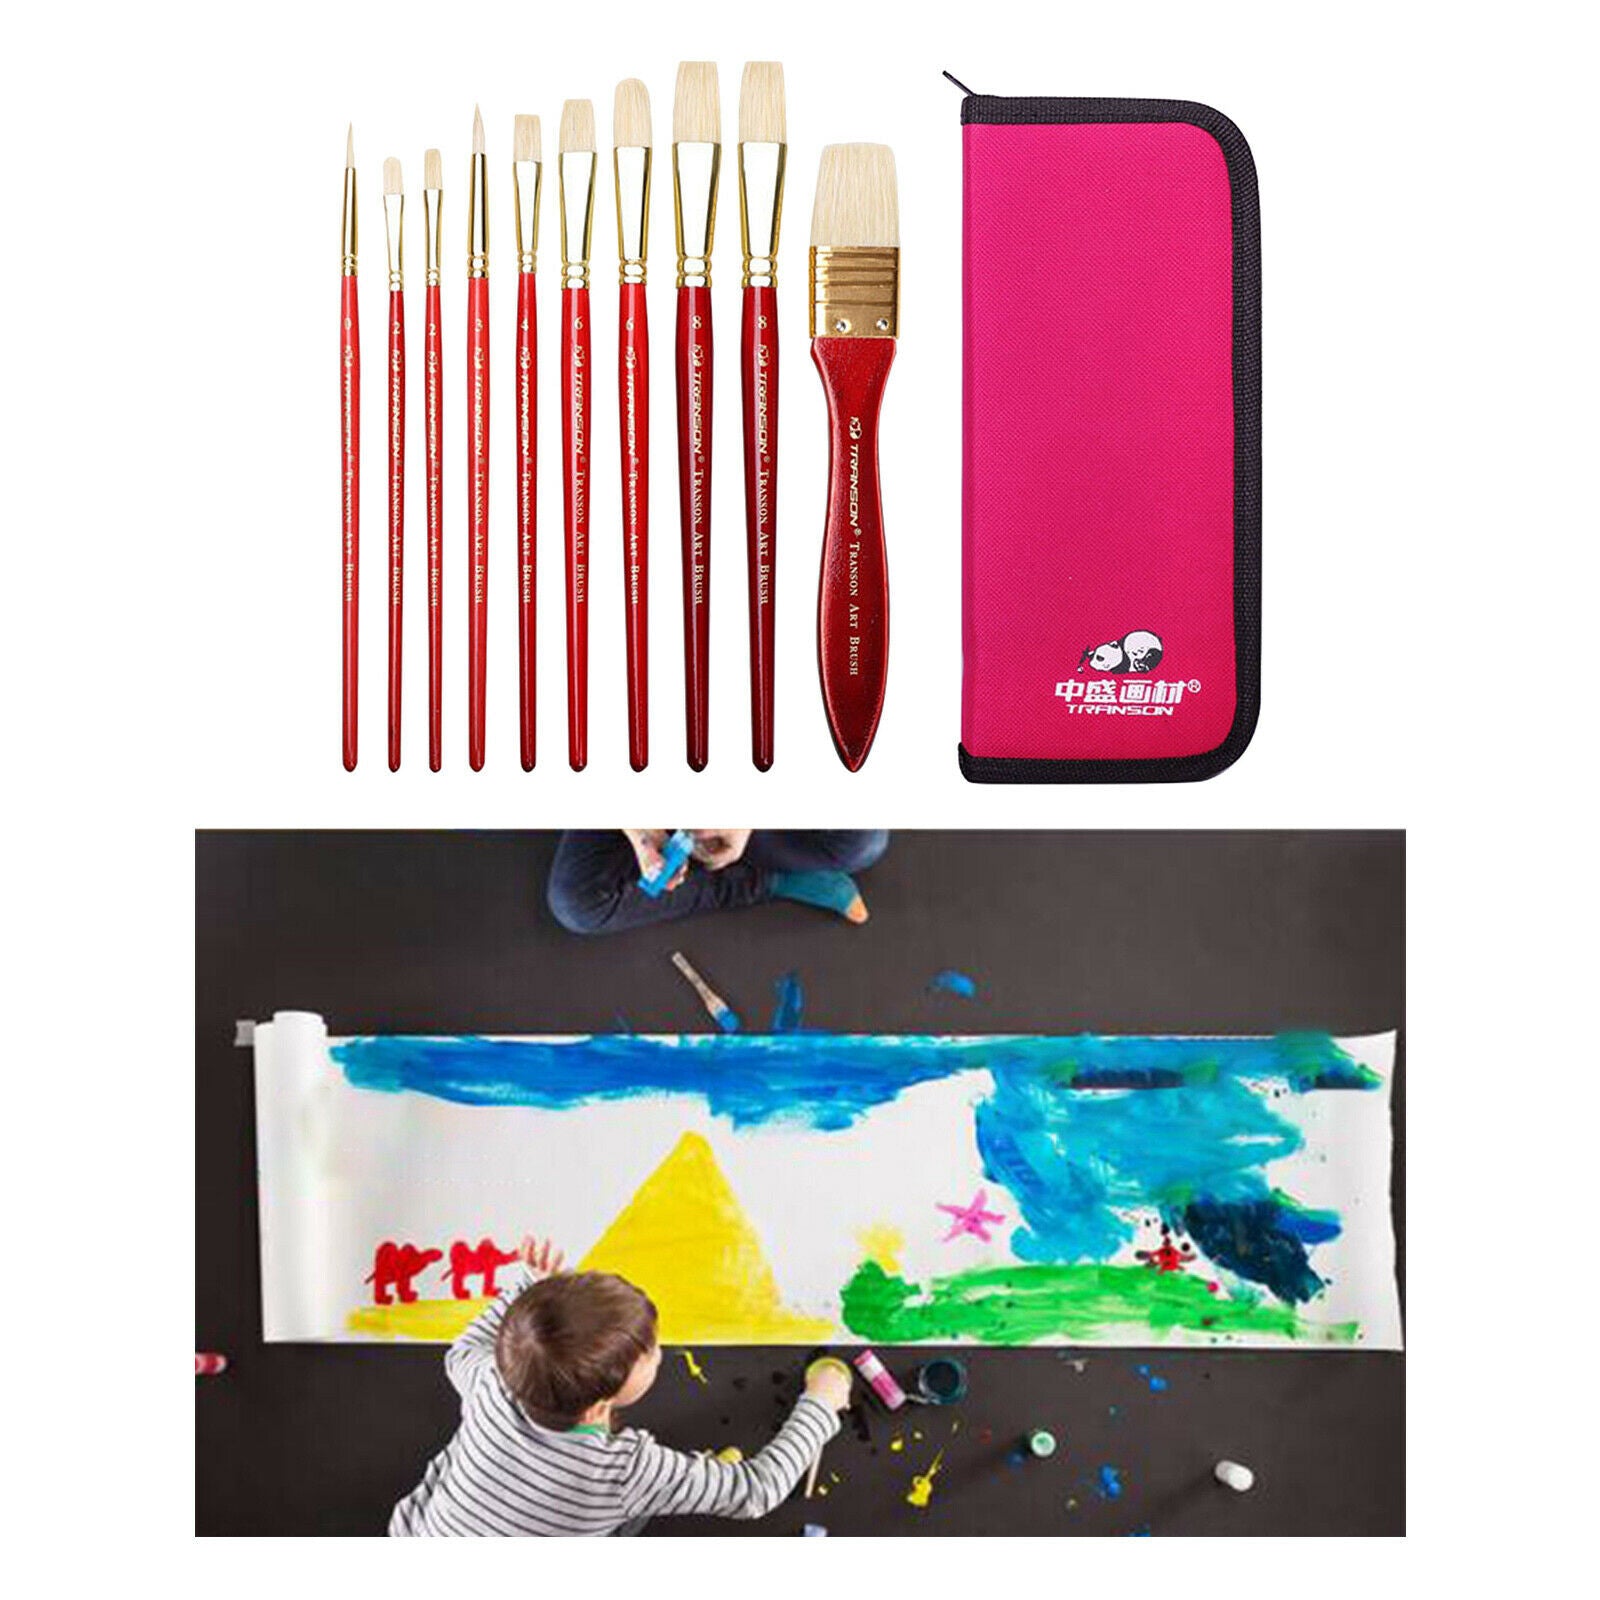 10pcs Art Acrylic Painting Brushes for Watercolor Face Body Painting with Bag